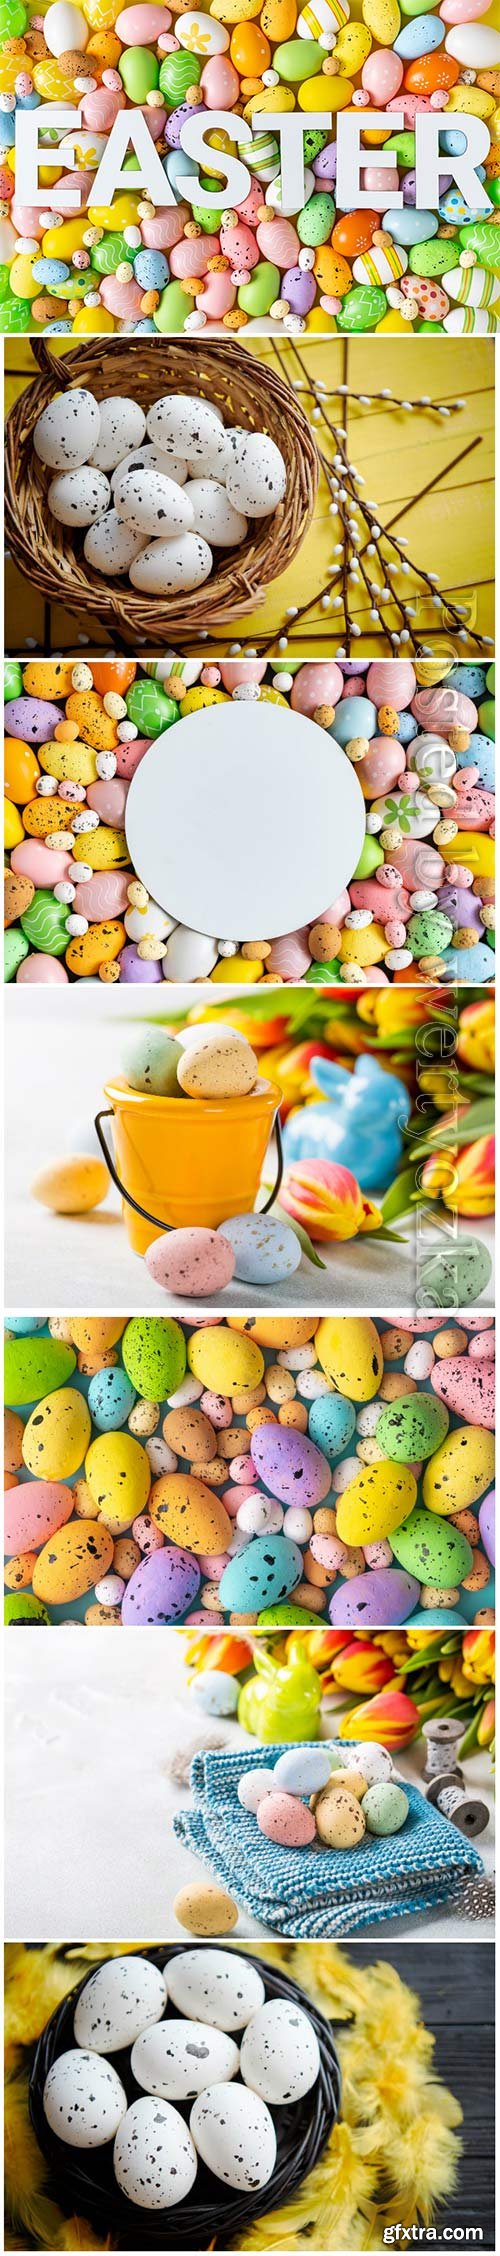 Happy Easter stock photo, Easter eggs, spring flowers # 5